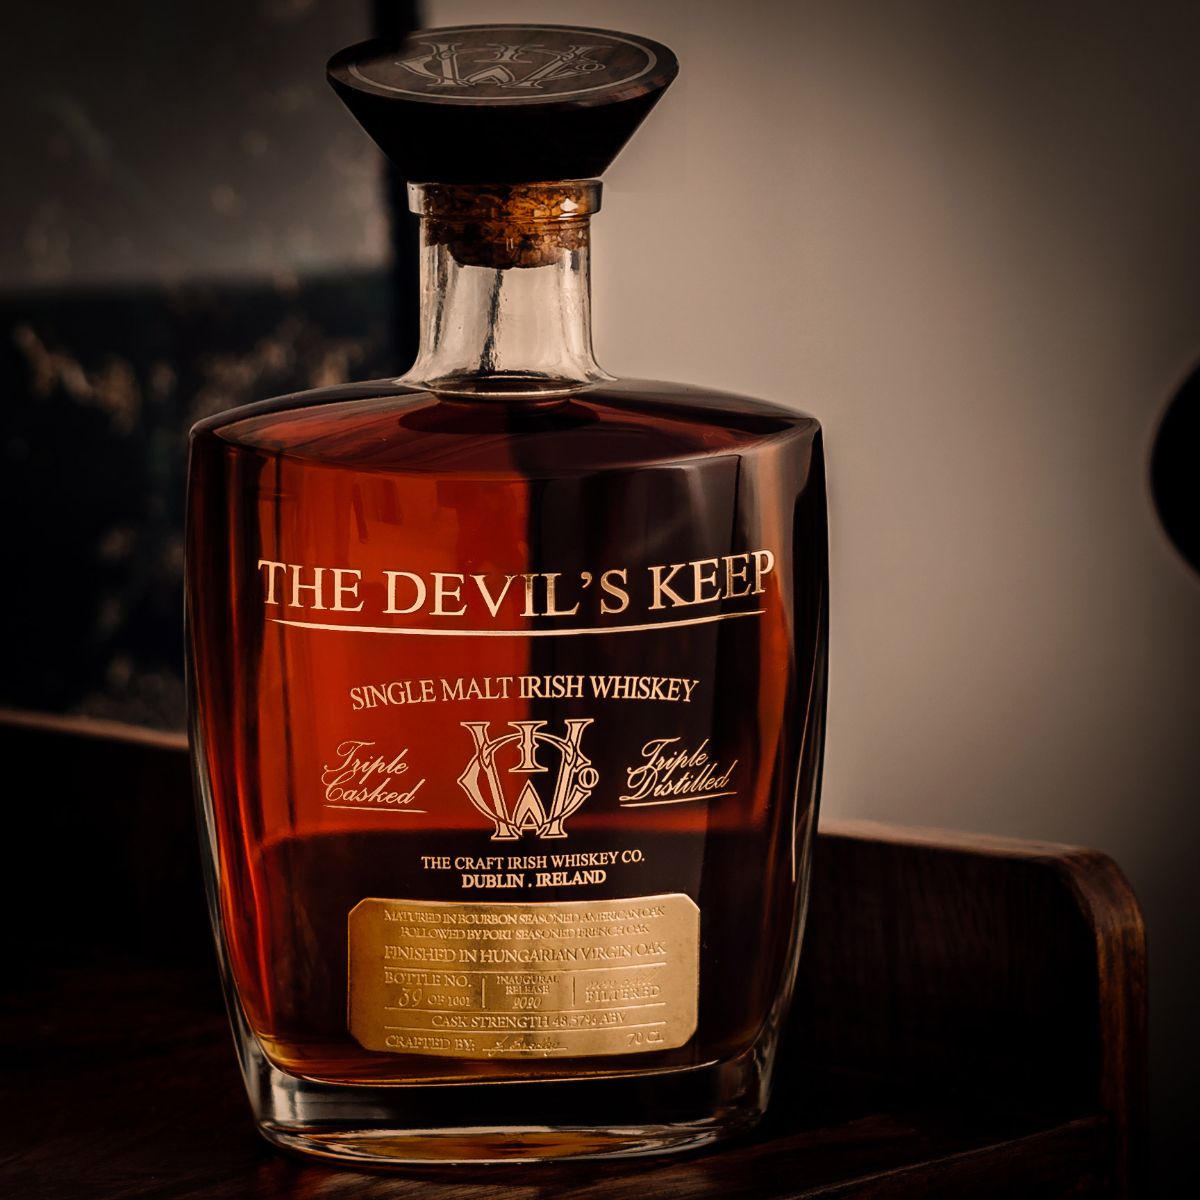 A bottle of rare whiskey The Devil's Keep